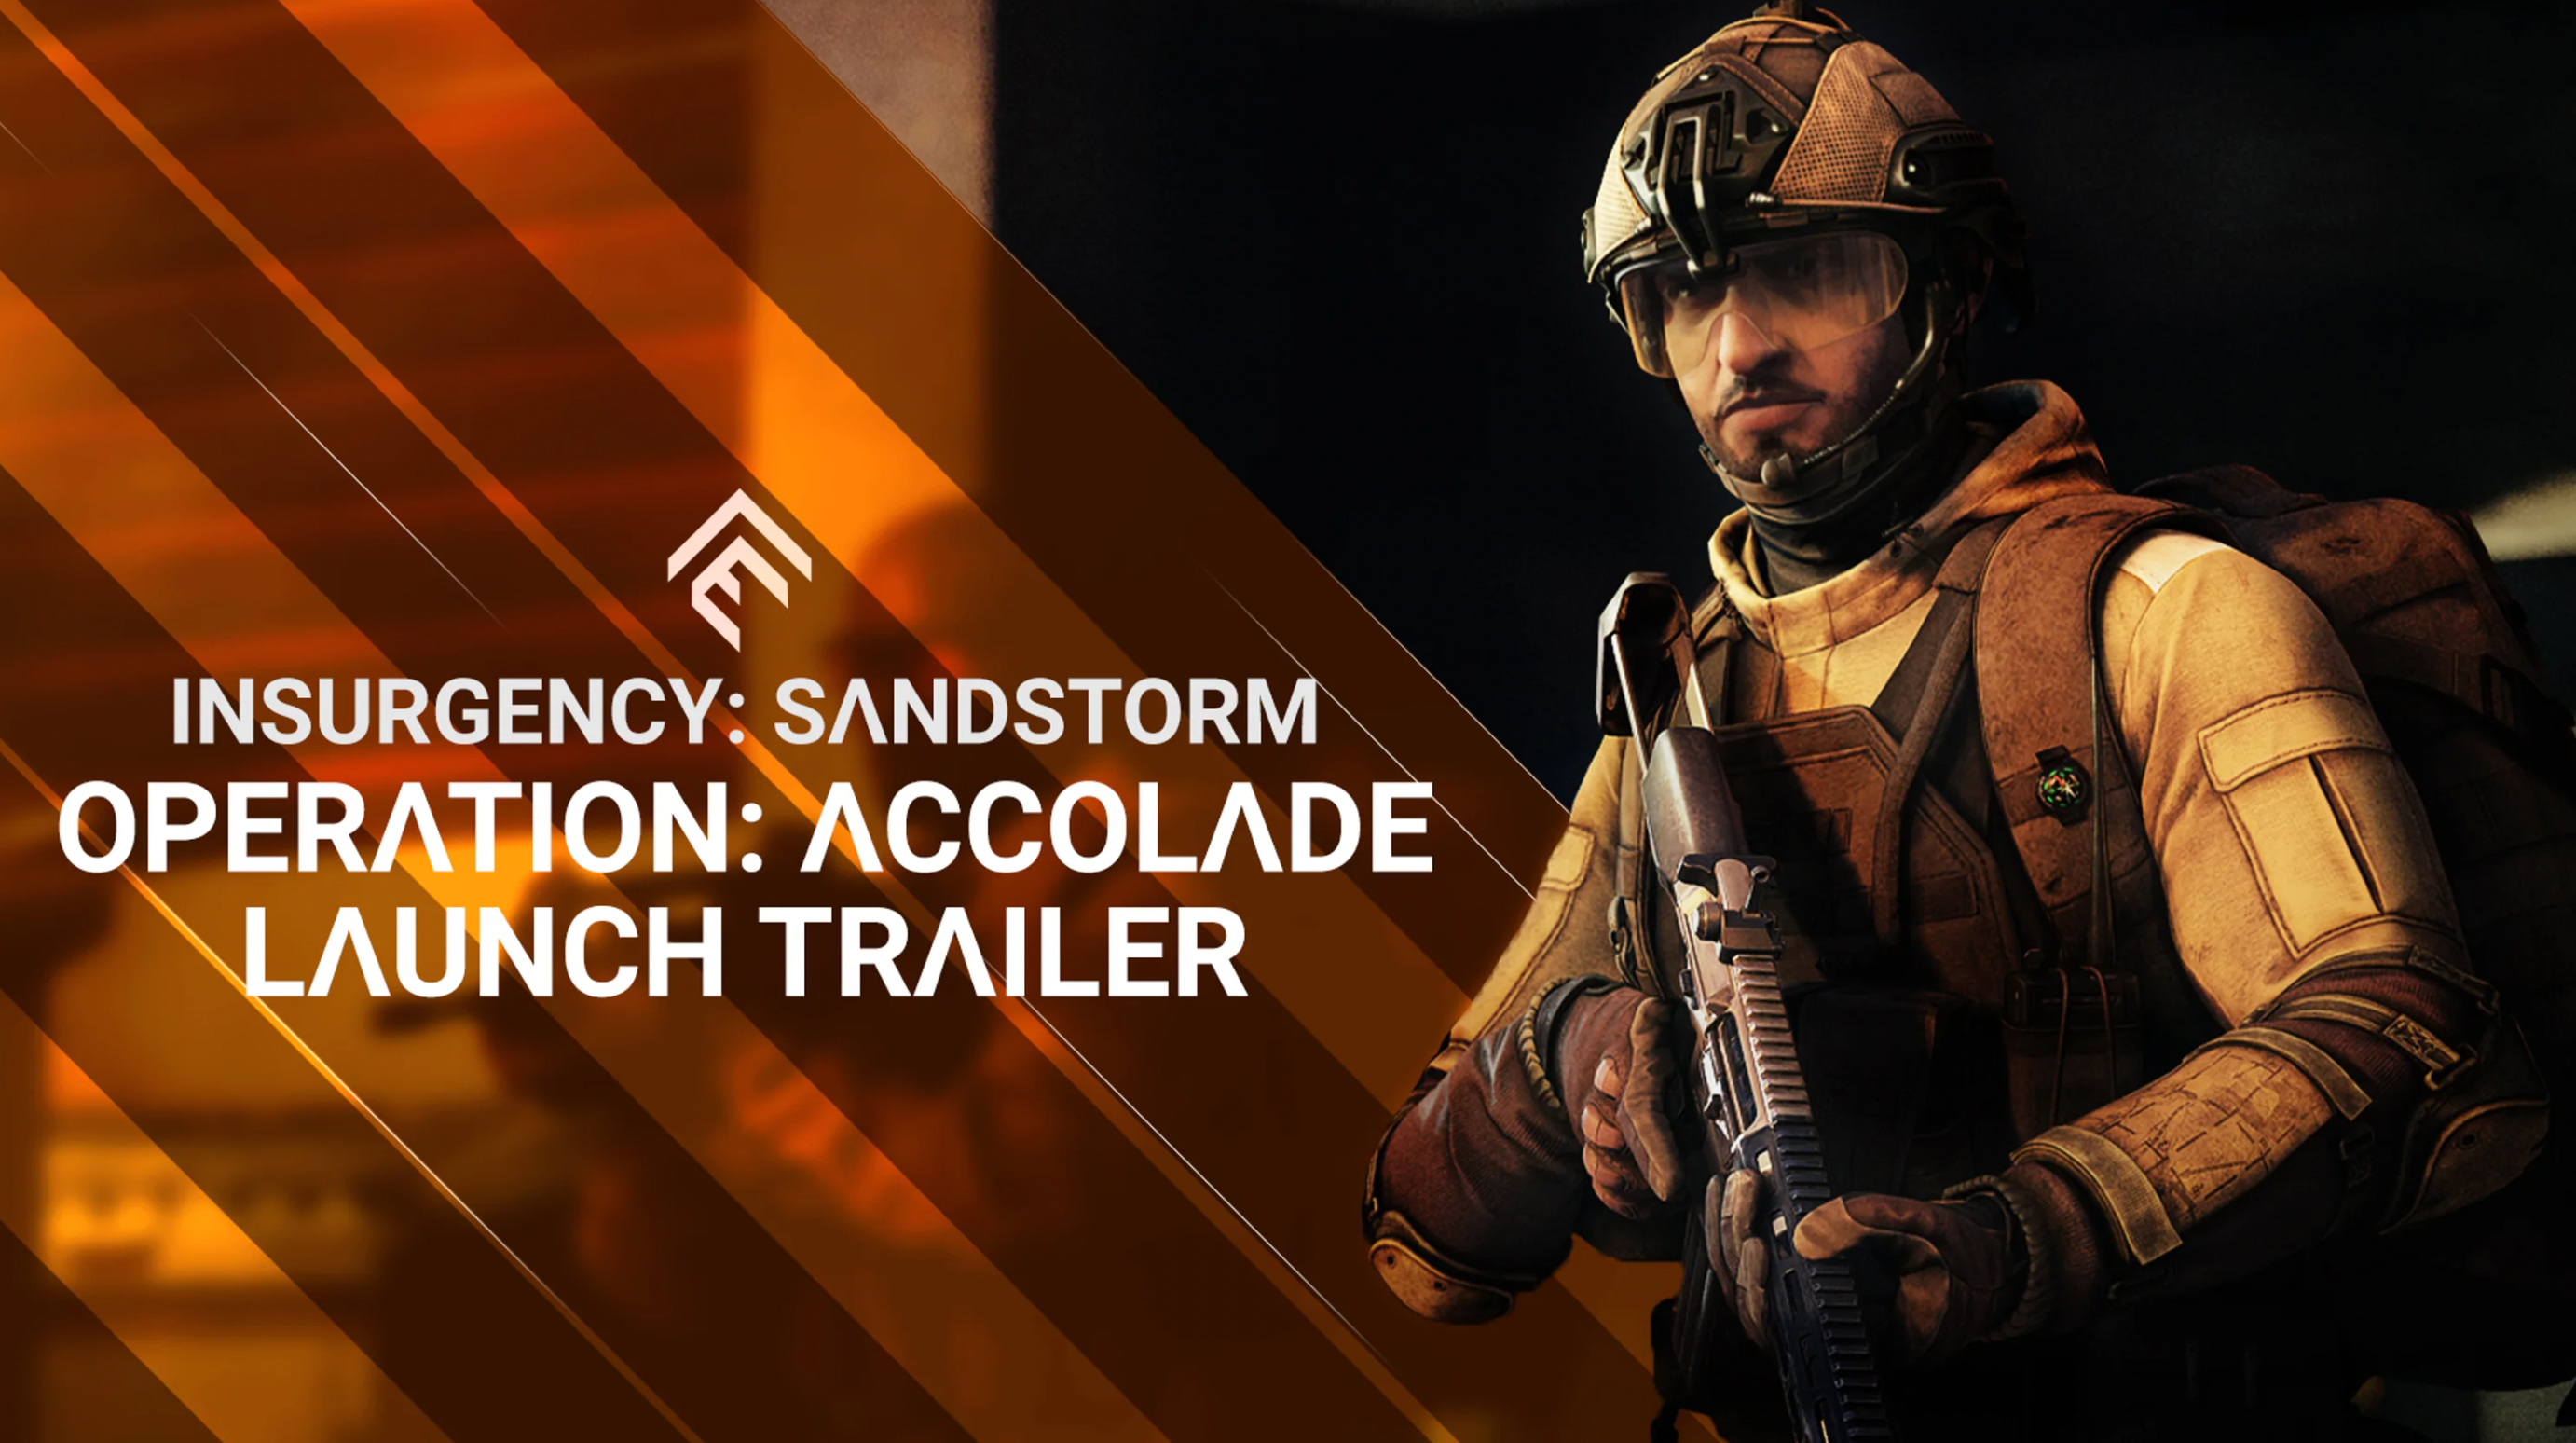 Insurgency: Sandstorm’s final Y2 “major content update” is now available